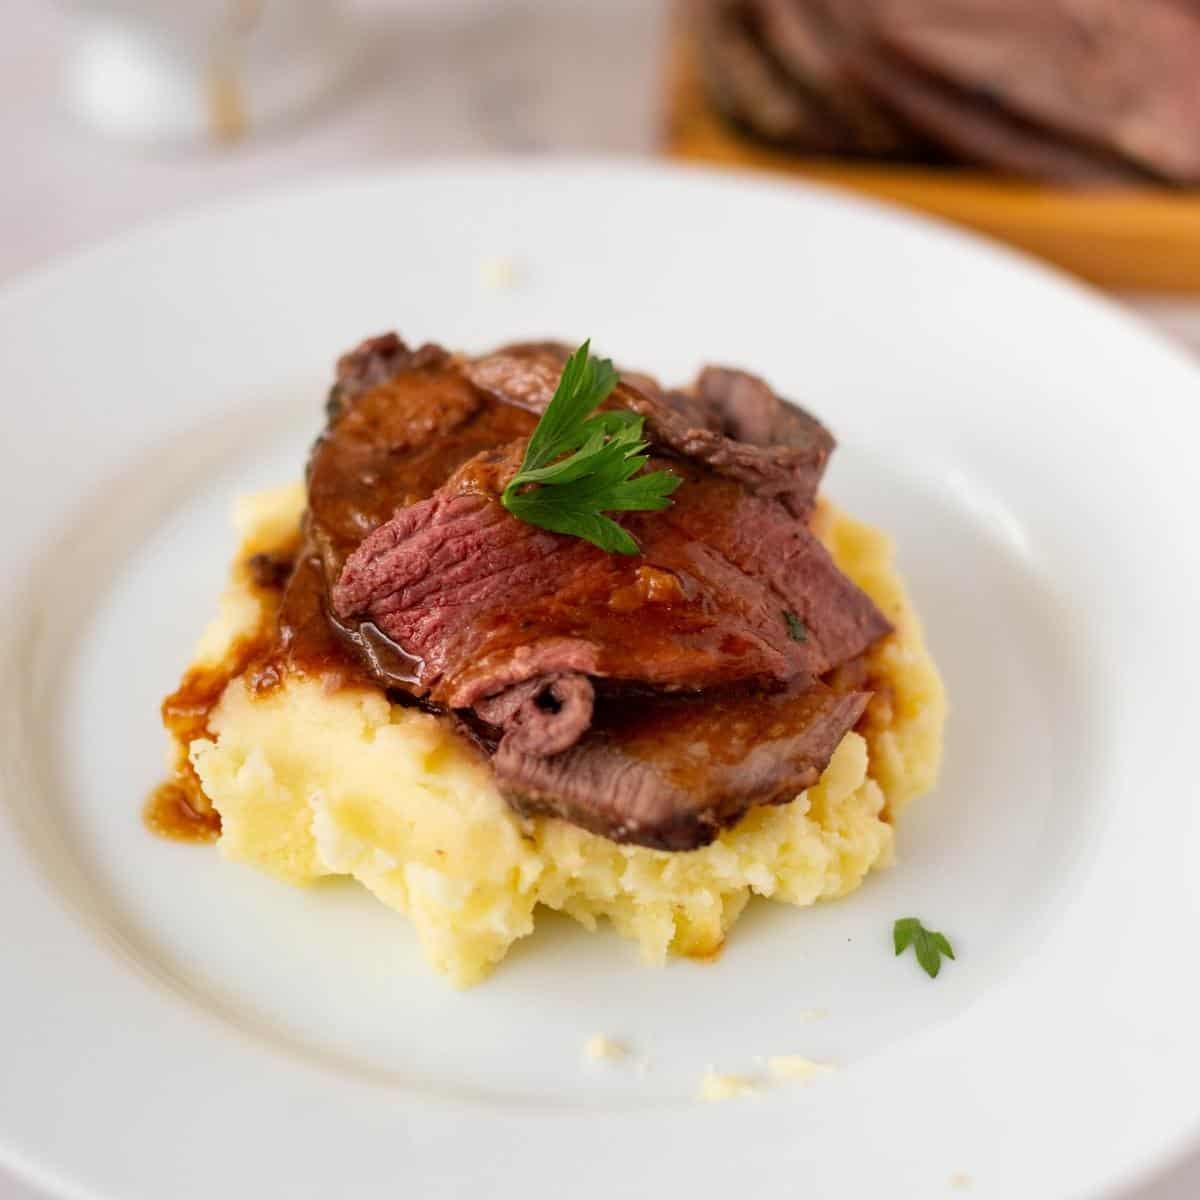 A plate with mashed potato with leg of lamb slices.